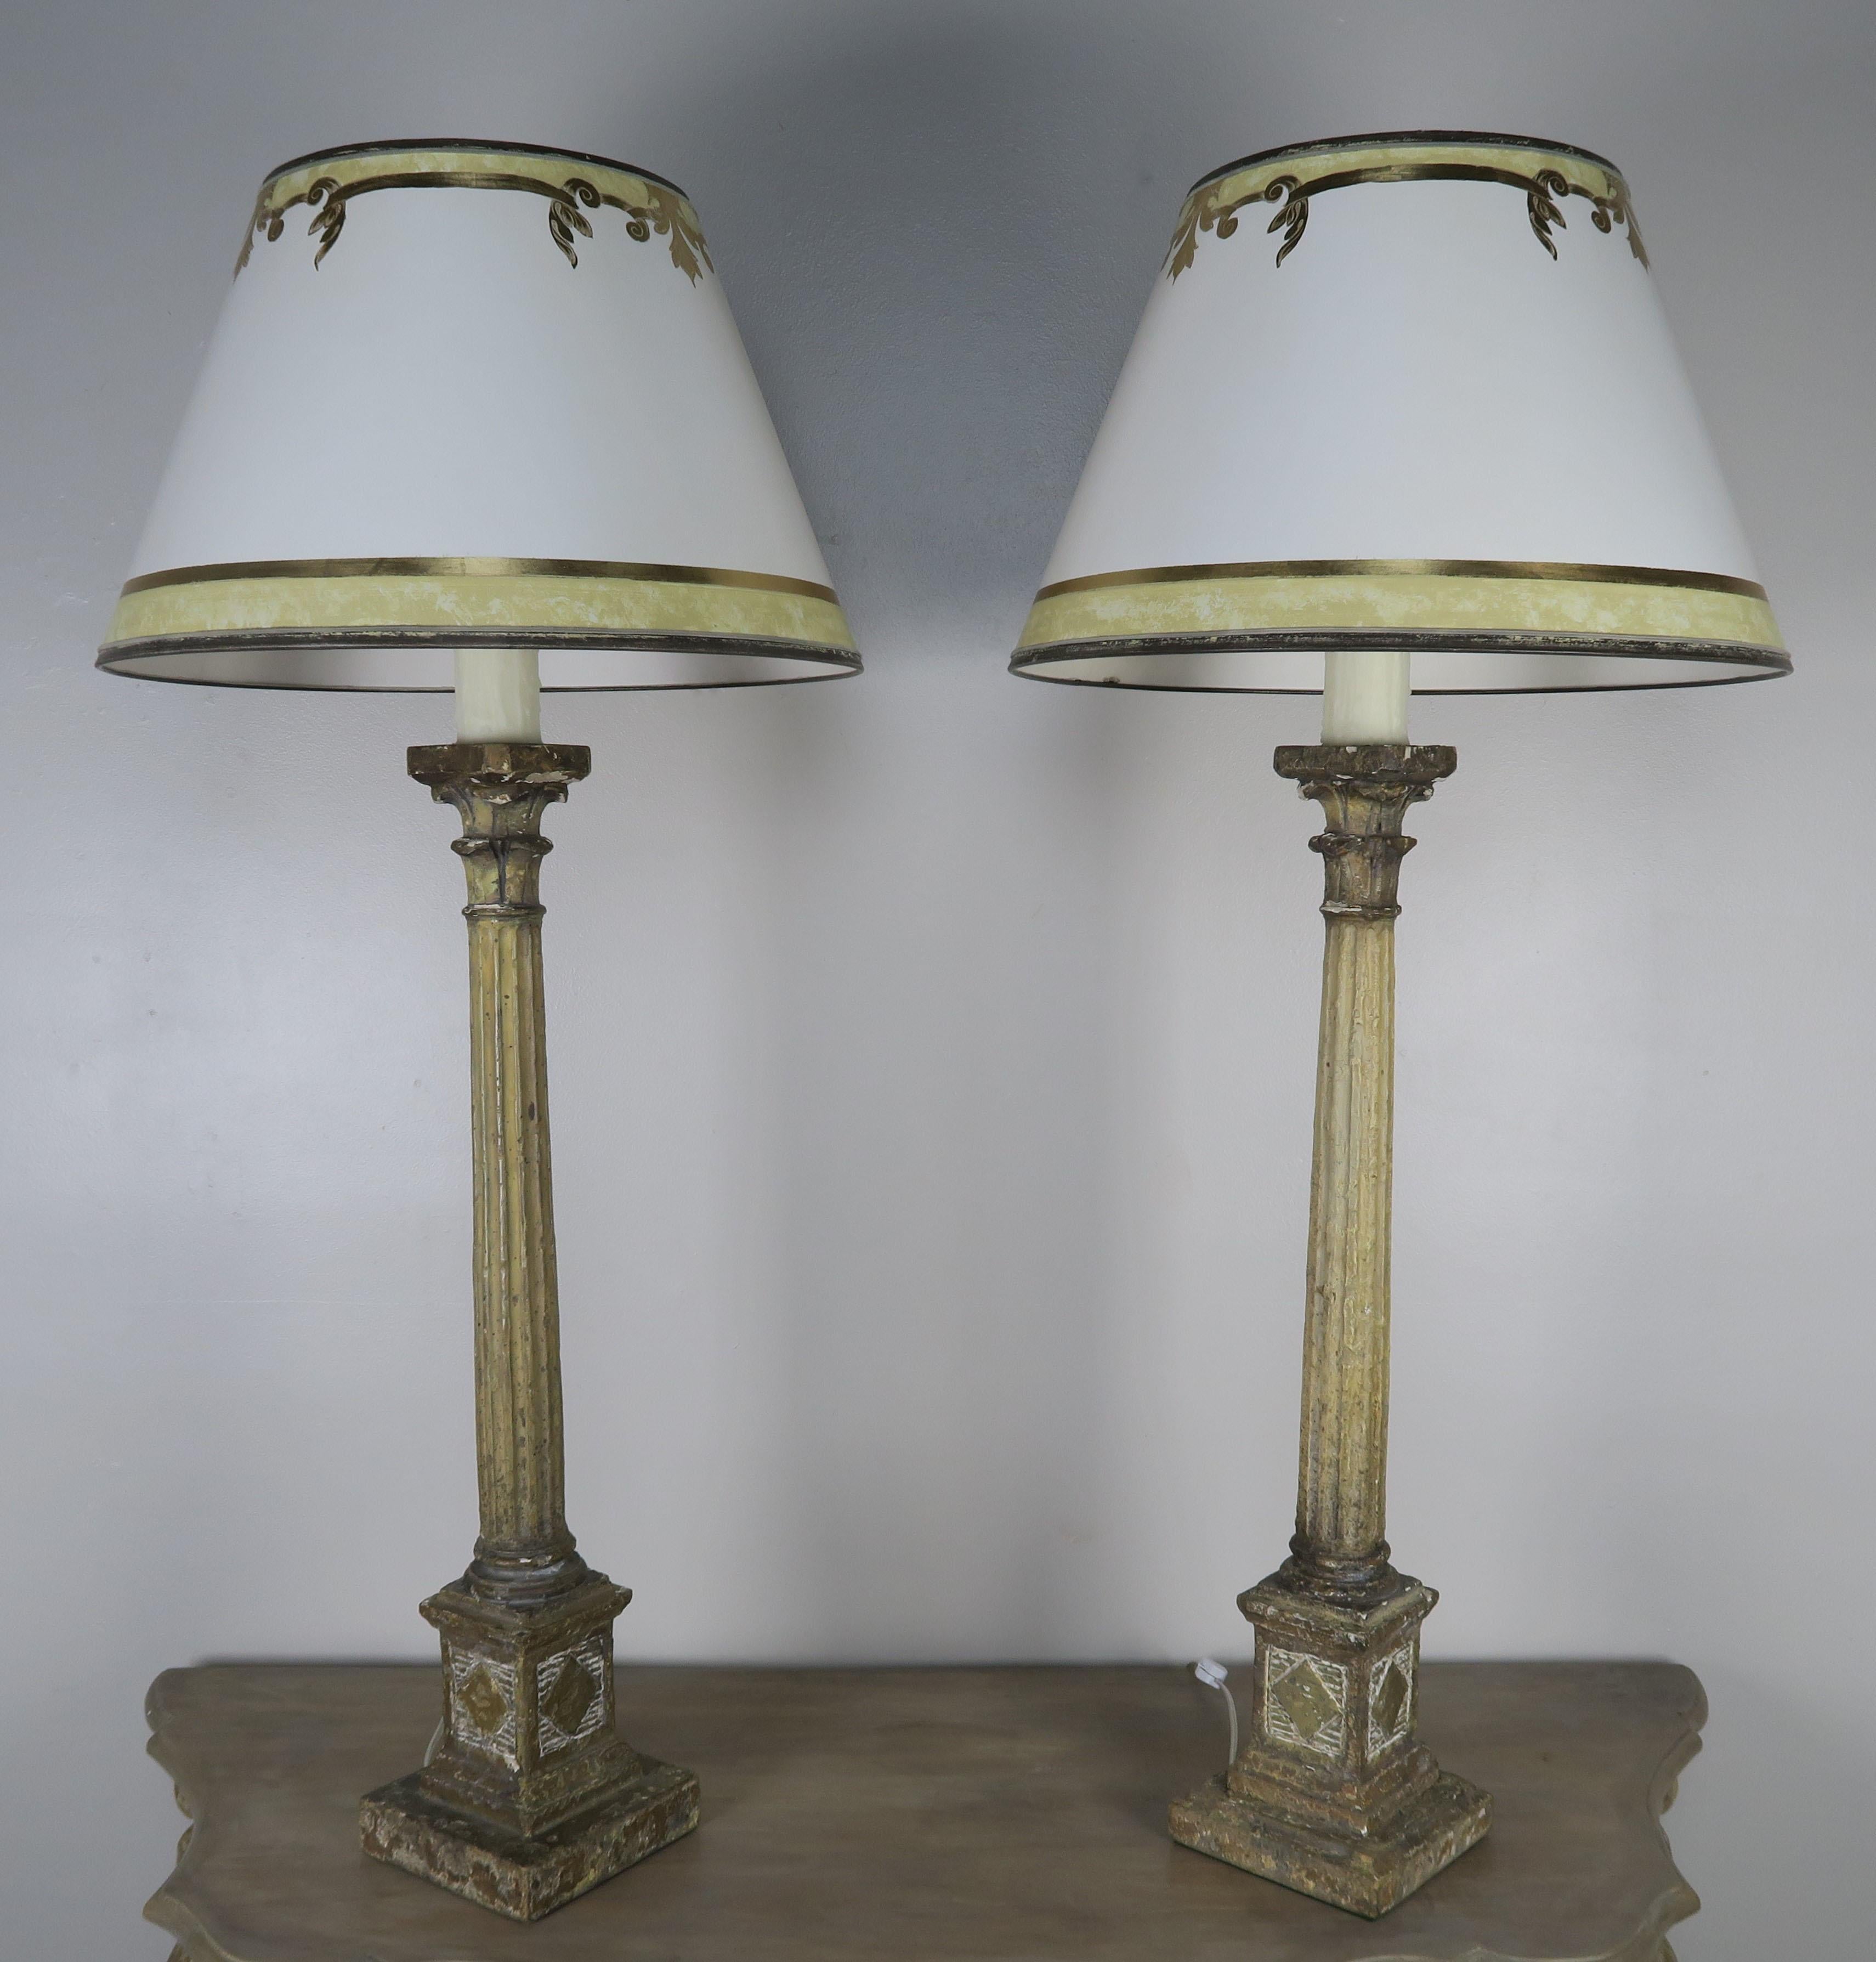 Pair of painted neoclassical style fluted column lamps with capitals crowned with hand painted parchment shades. The lamps are newly rewired and ready to use.